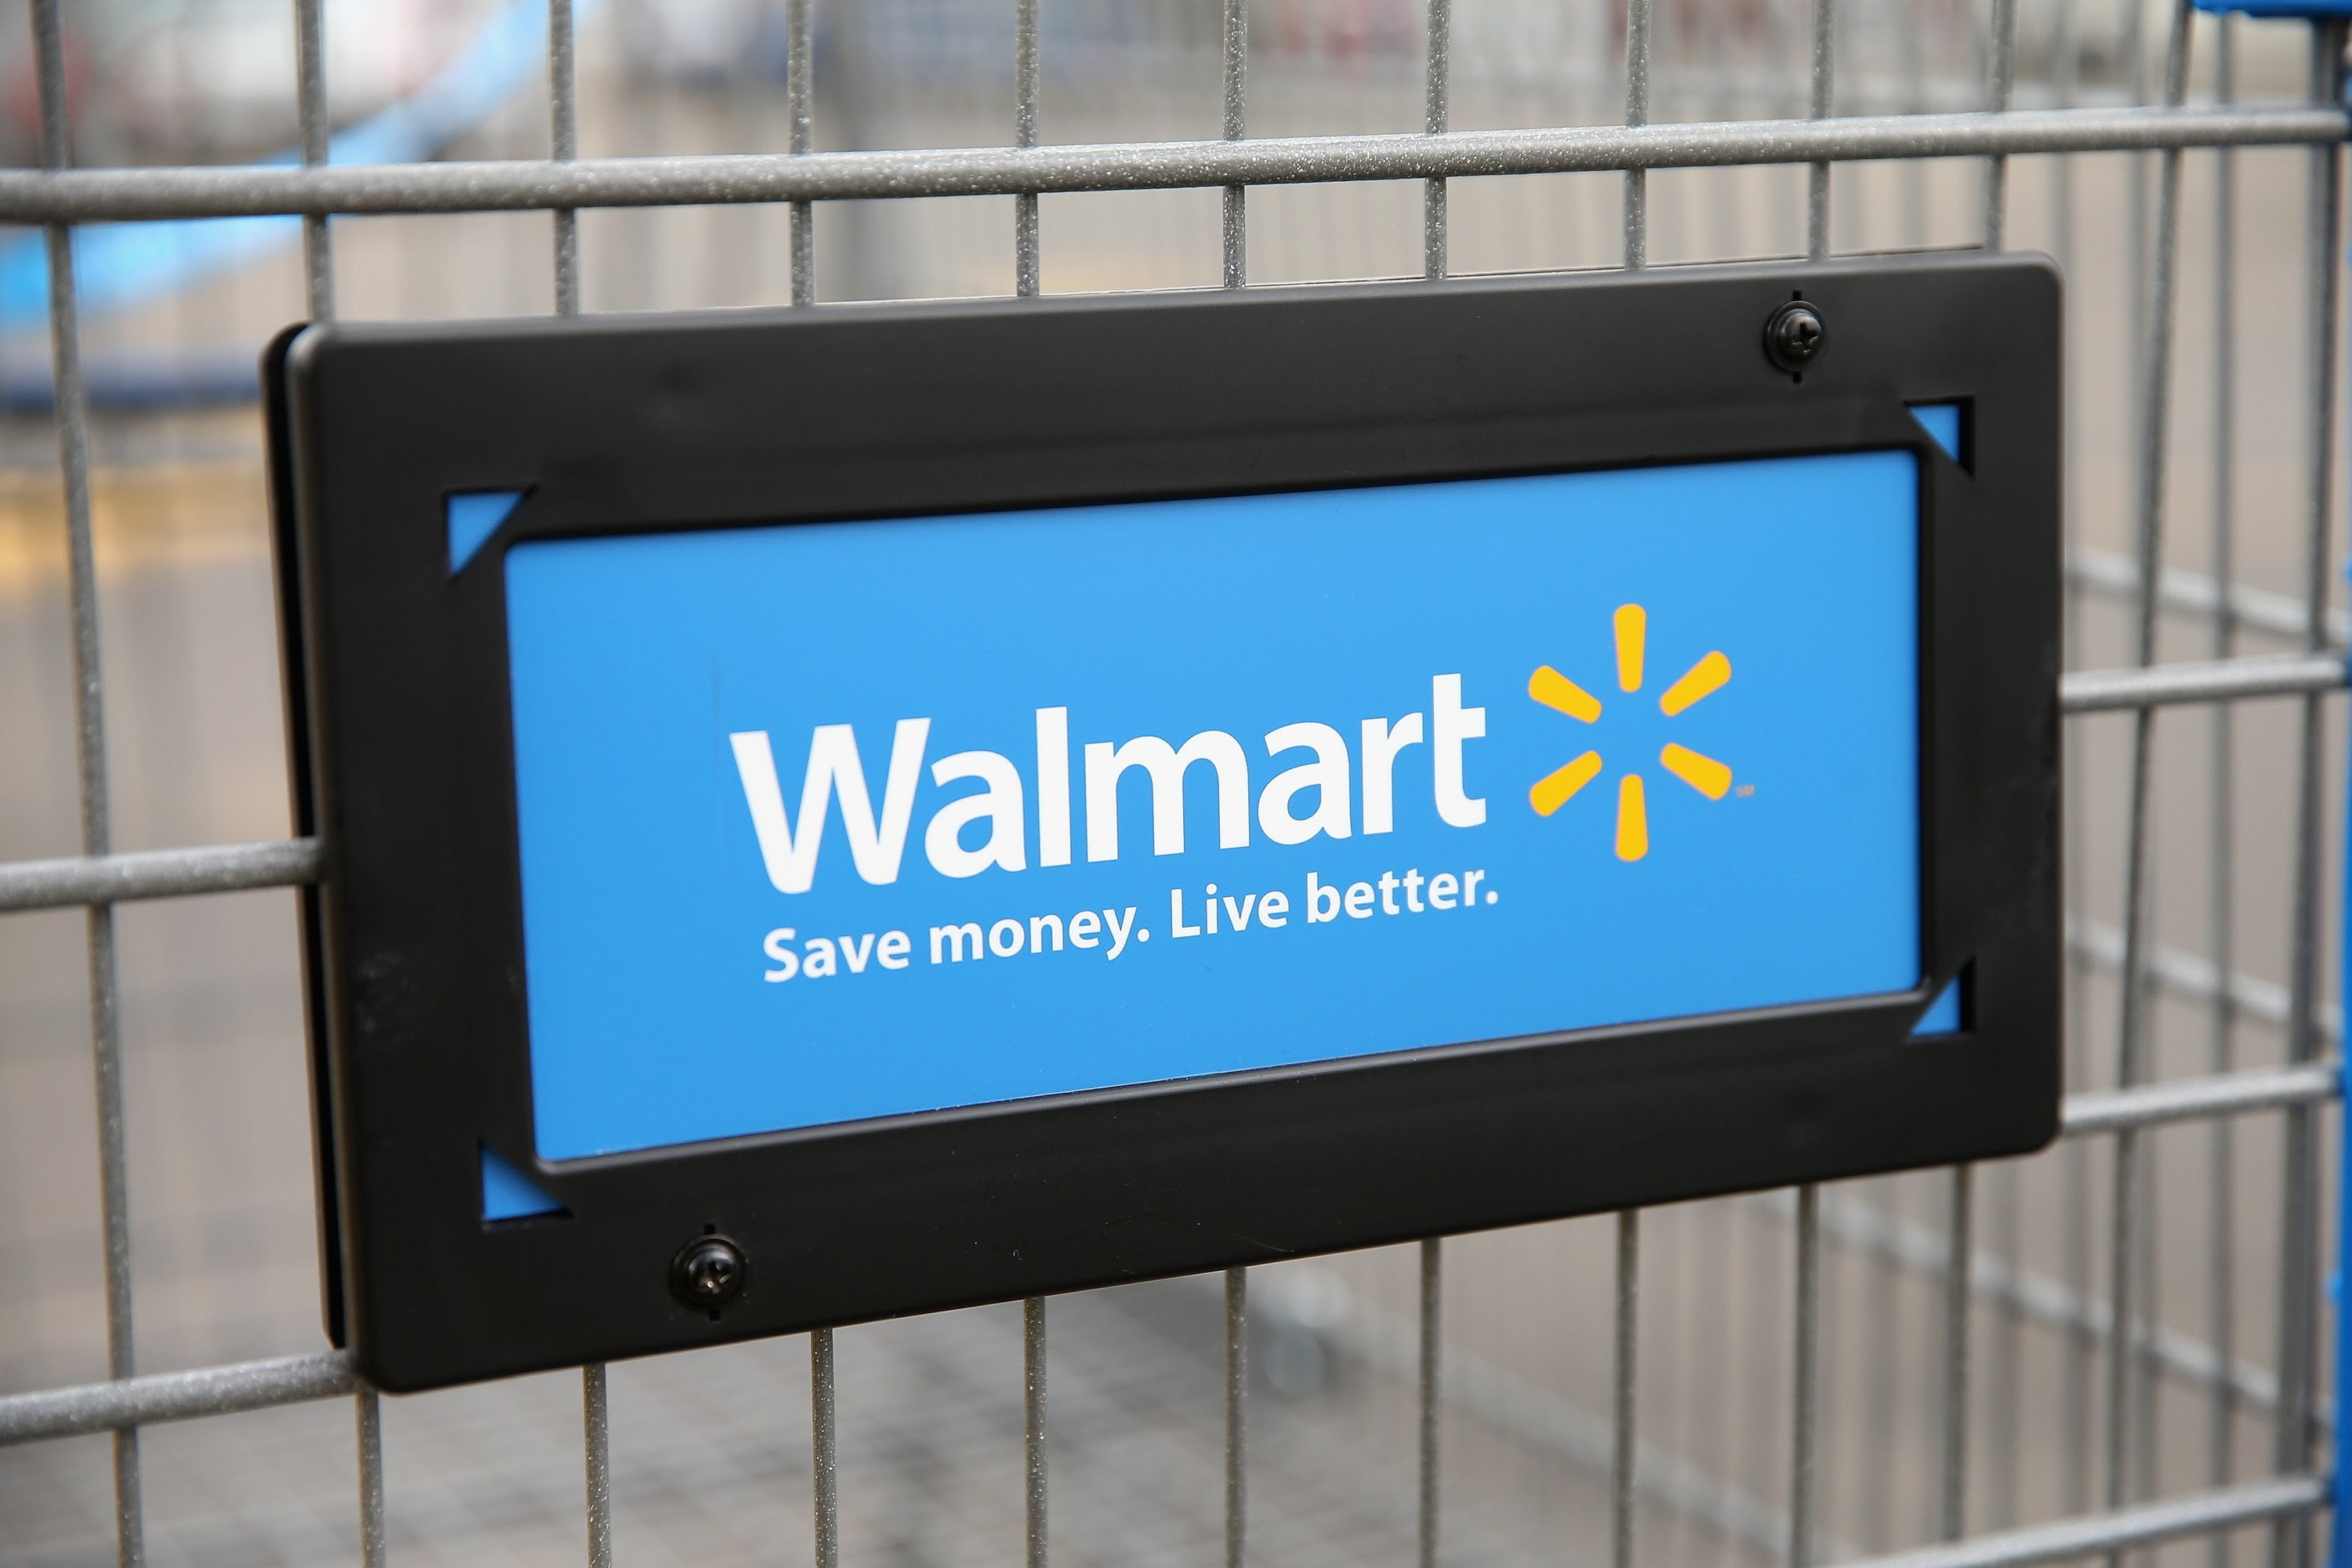 The Walmart logo is displayed on a shopping cart at a Walmart store on August 15, 2013 in Chicago, Illinois. (Photo by Scott Olson/Getty Images)